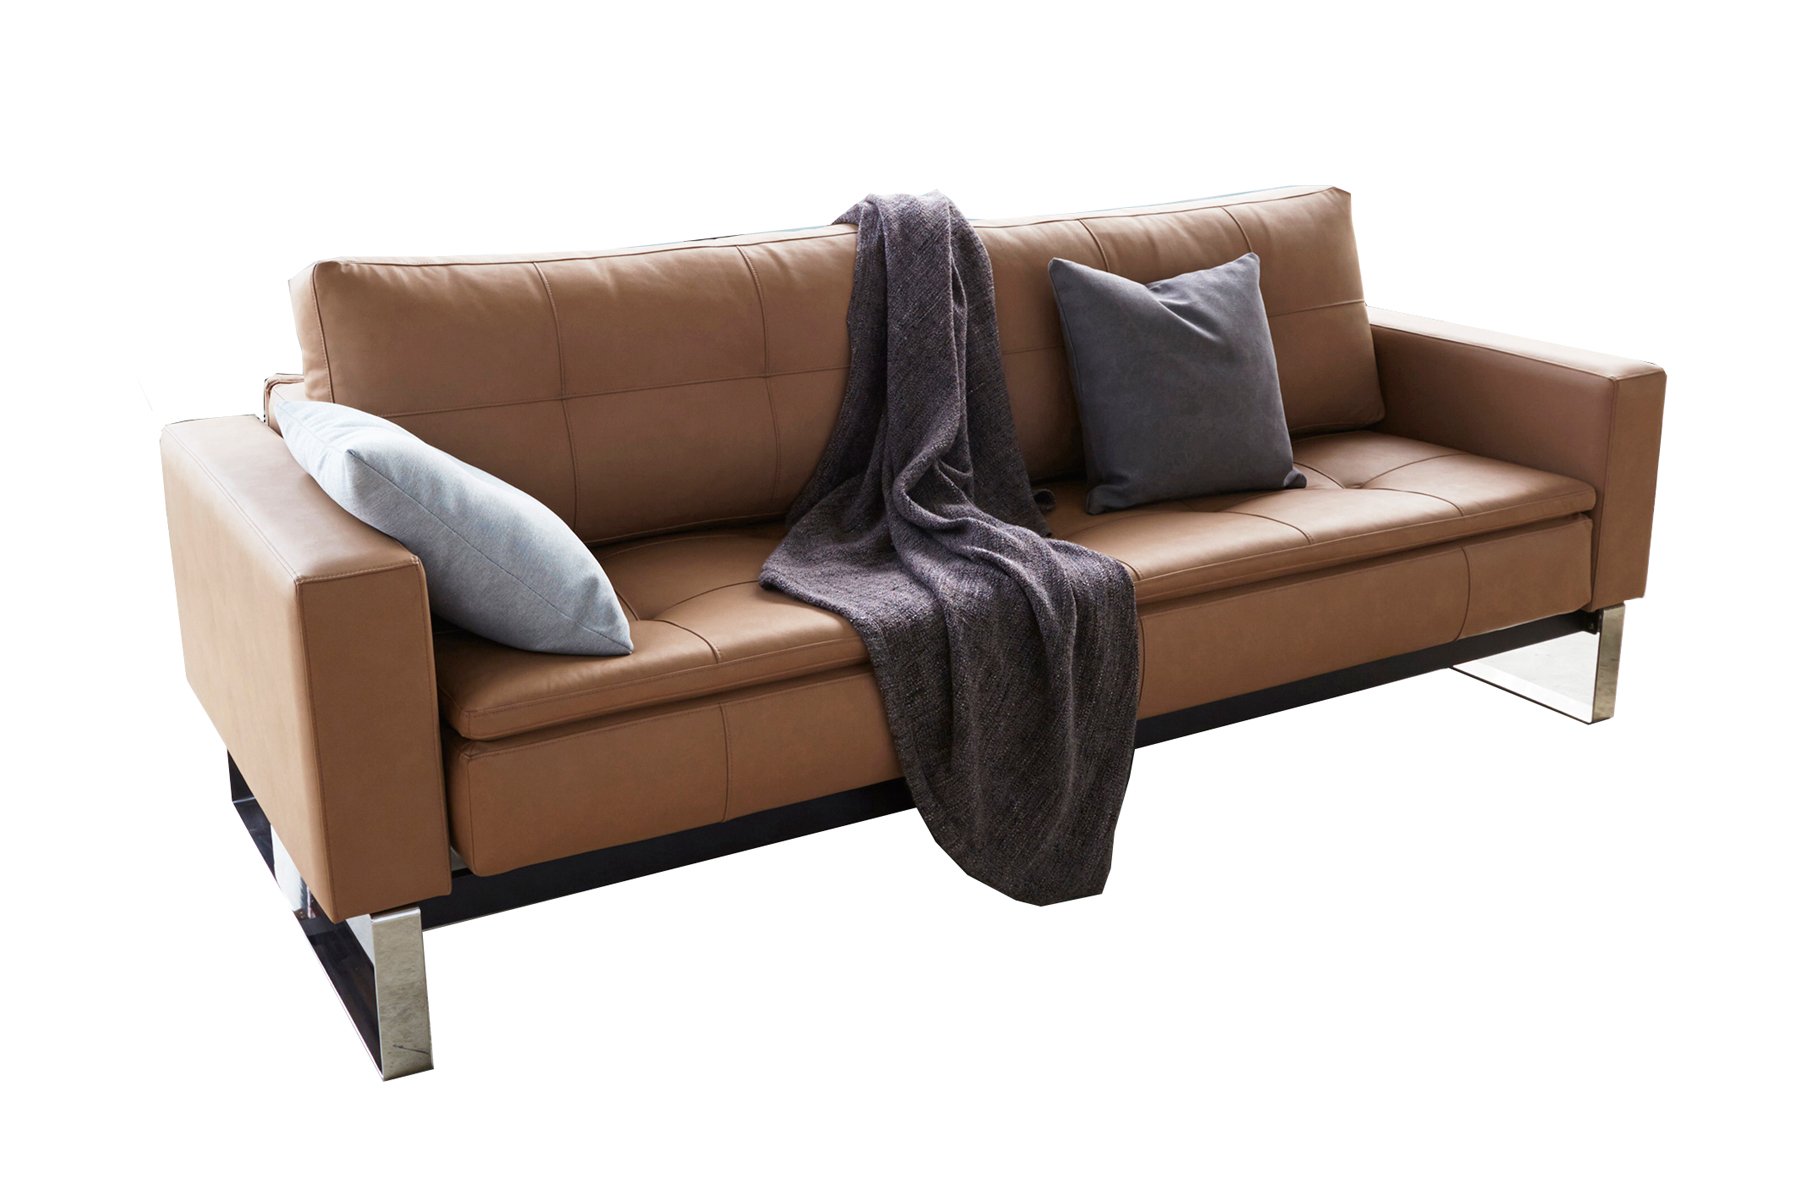 dual sofa bed with arms